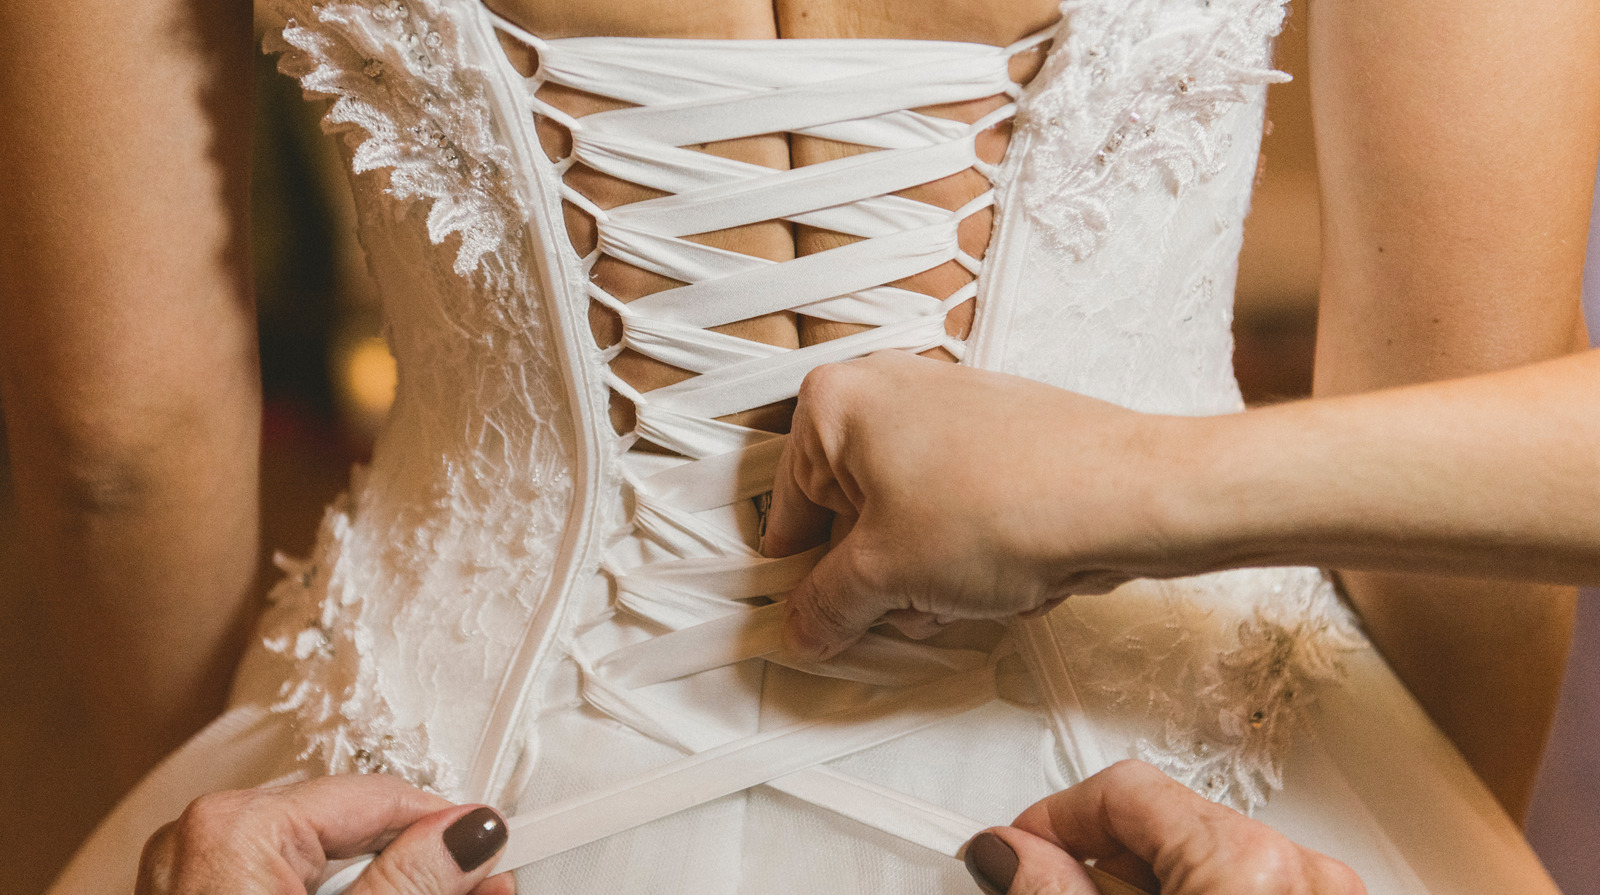 What is the difference between corset, bustier and bodice styles?